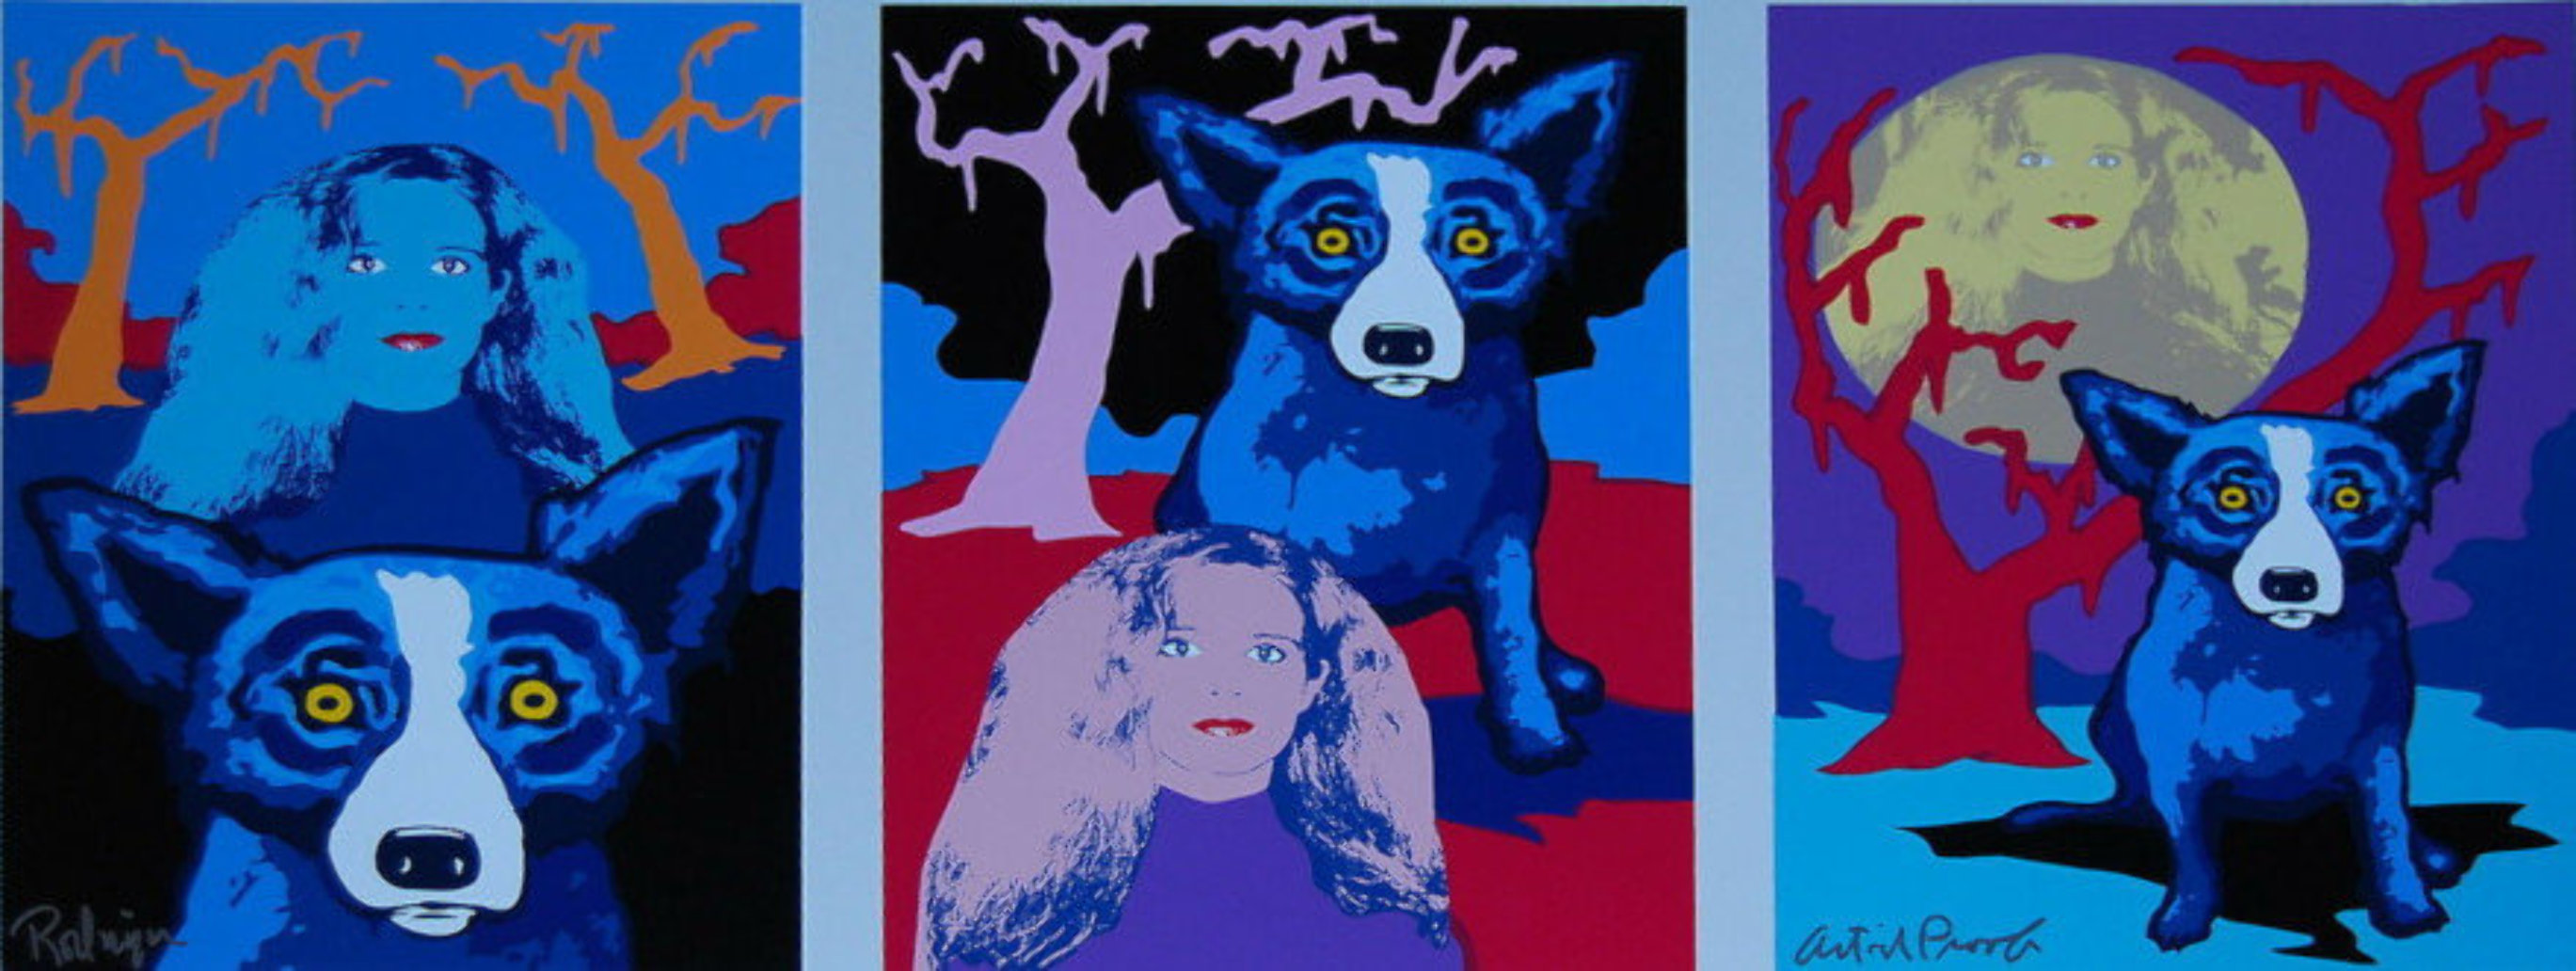 Night Love AP Limited Edition Print by Blue Dog George Rodrigue